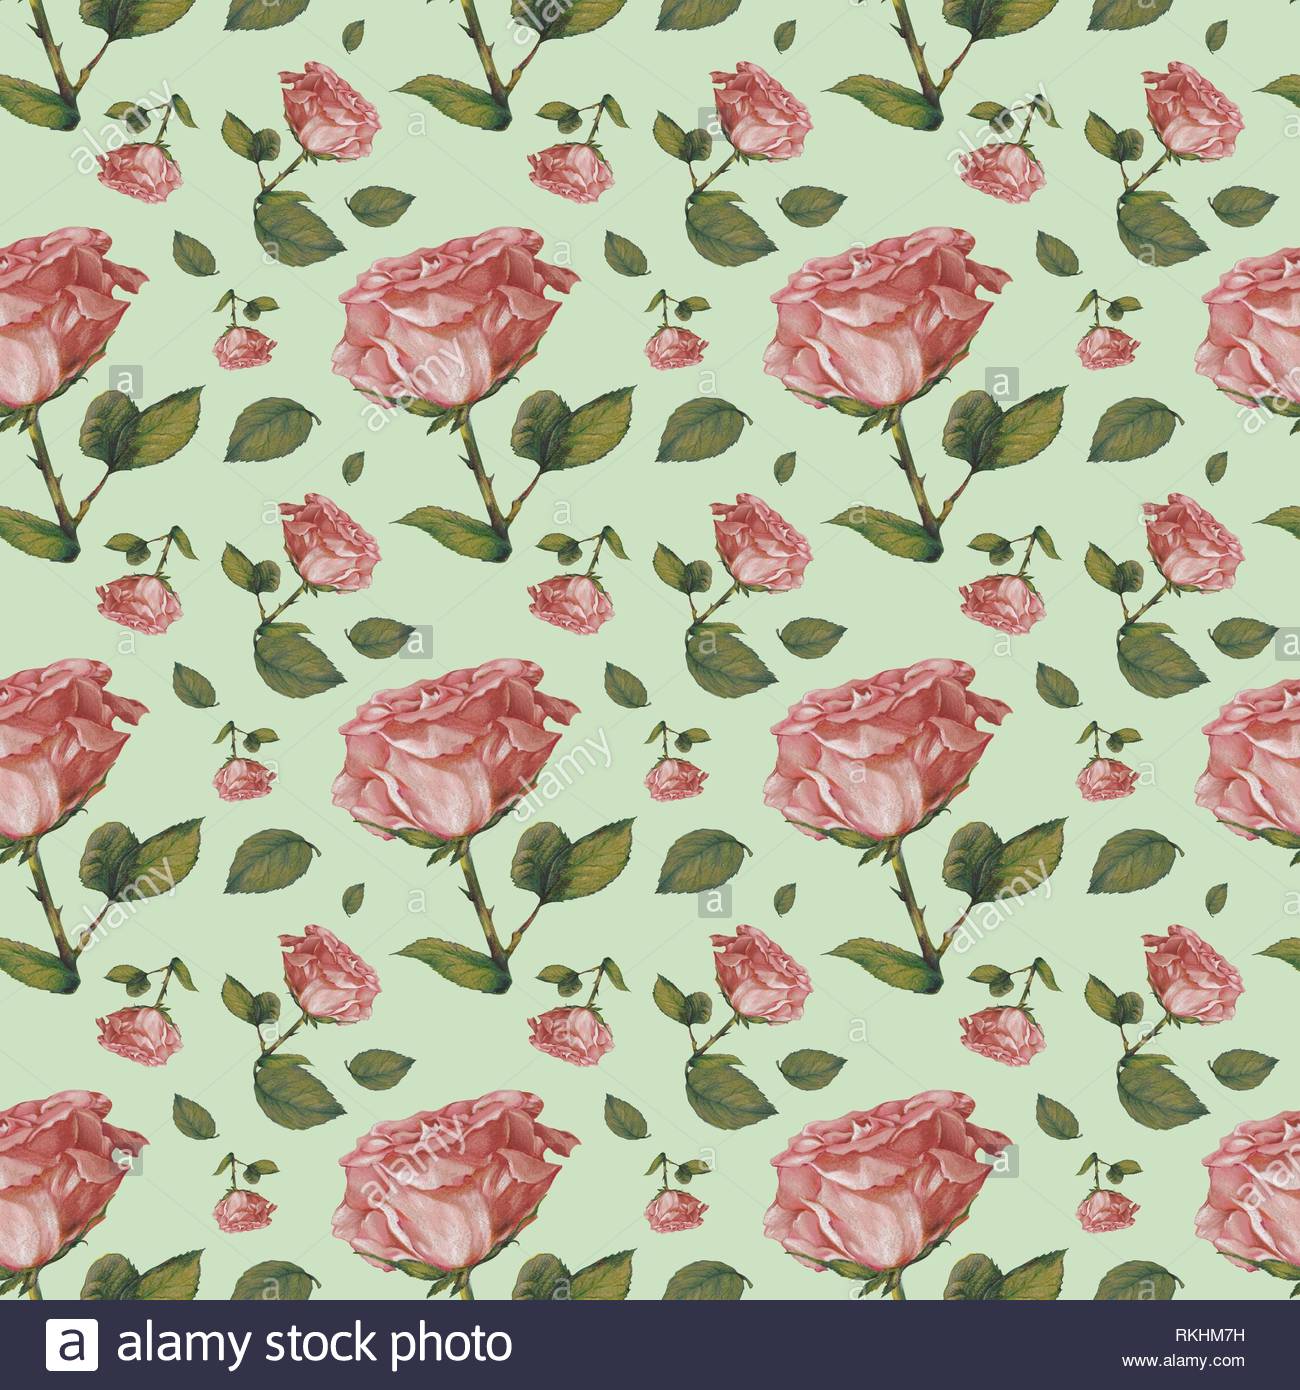 Wallpaper Wrapping Paper Seamless Pattern Old Pink Roses